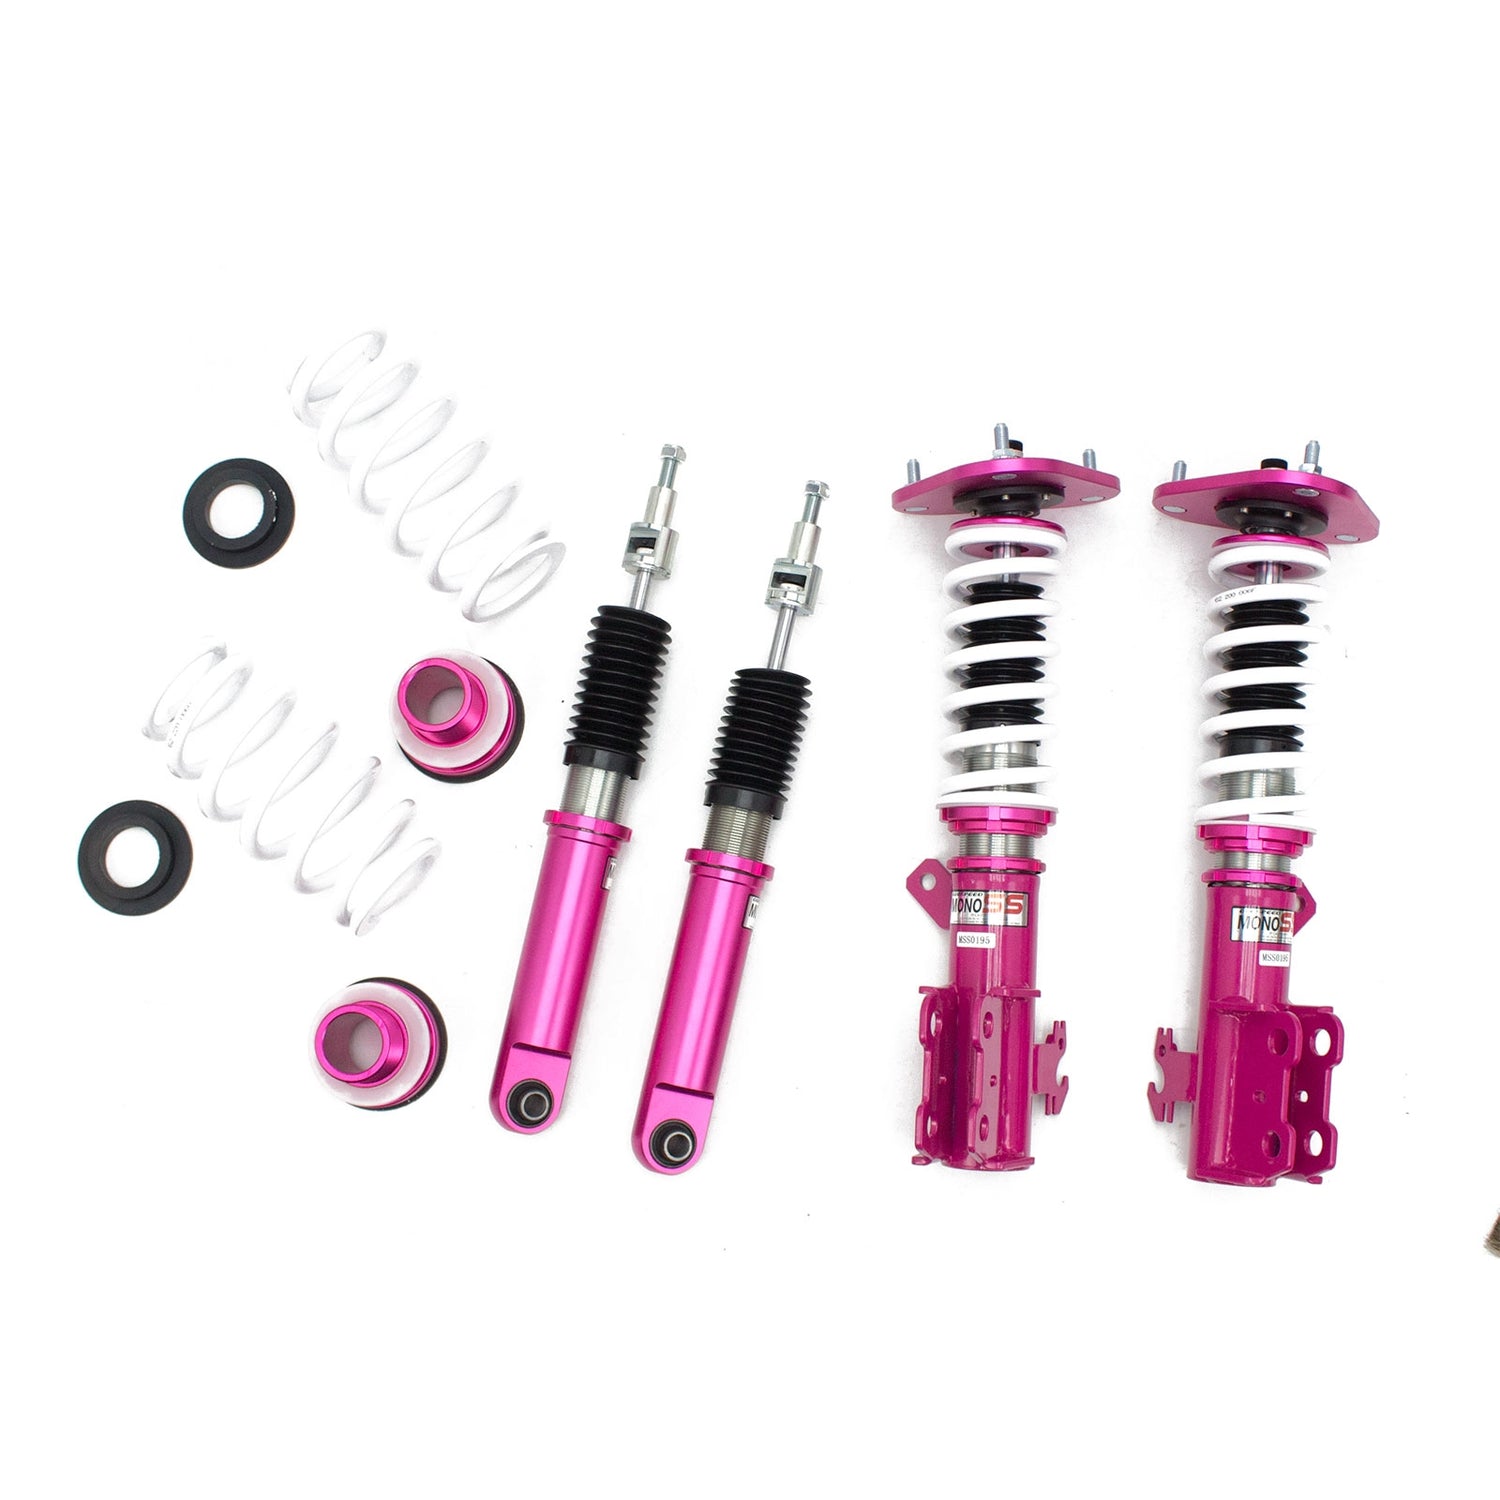 Godspeed(MSS0195) MonoSS Coilover Lowering Kit, Fully Adjustable, Ride Height, Spring Tension And 16 Click Damping